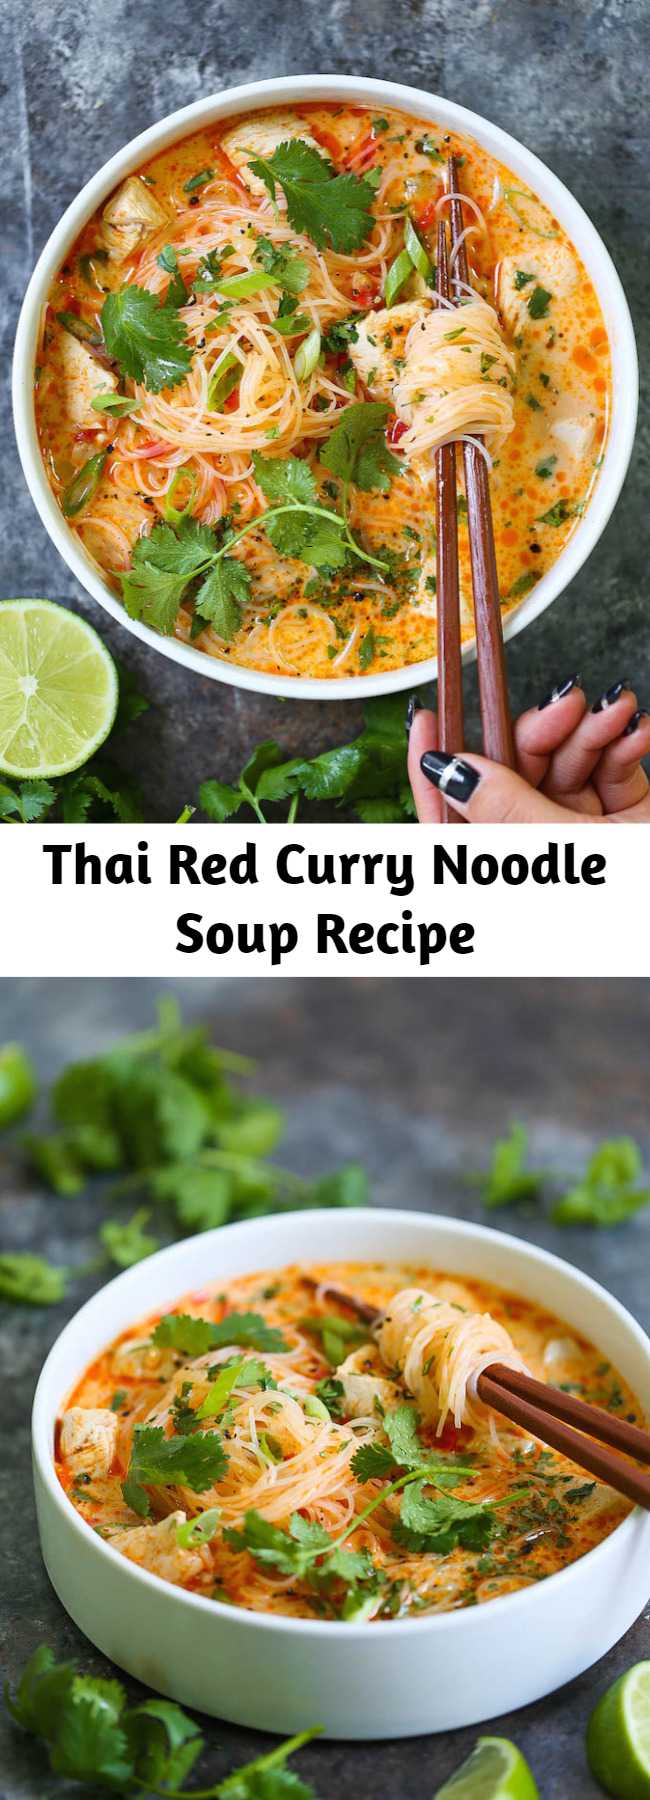 Thai Red Curry Noodle Soup Recipe - Yes, you can have Thai takeout right at home! This soup is packed with so much flavor with bites of tender chicken, rice noodles, cilantro, basil and lime juice! So cozy, comforting and fragrant – plus, it’s easy enough for any night of the week!